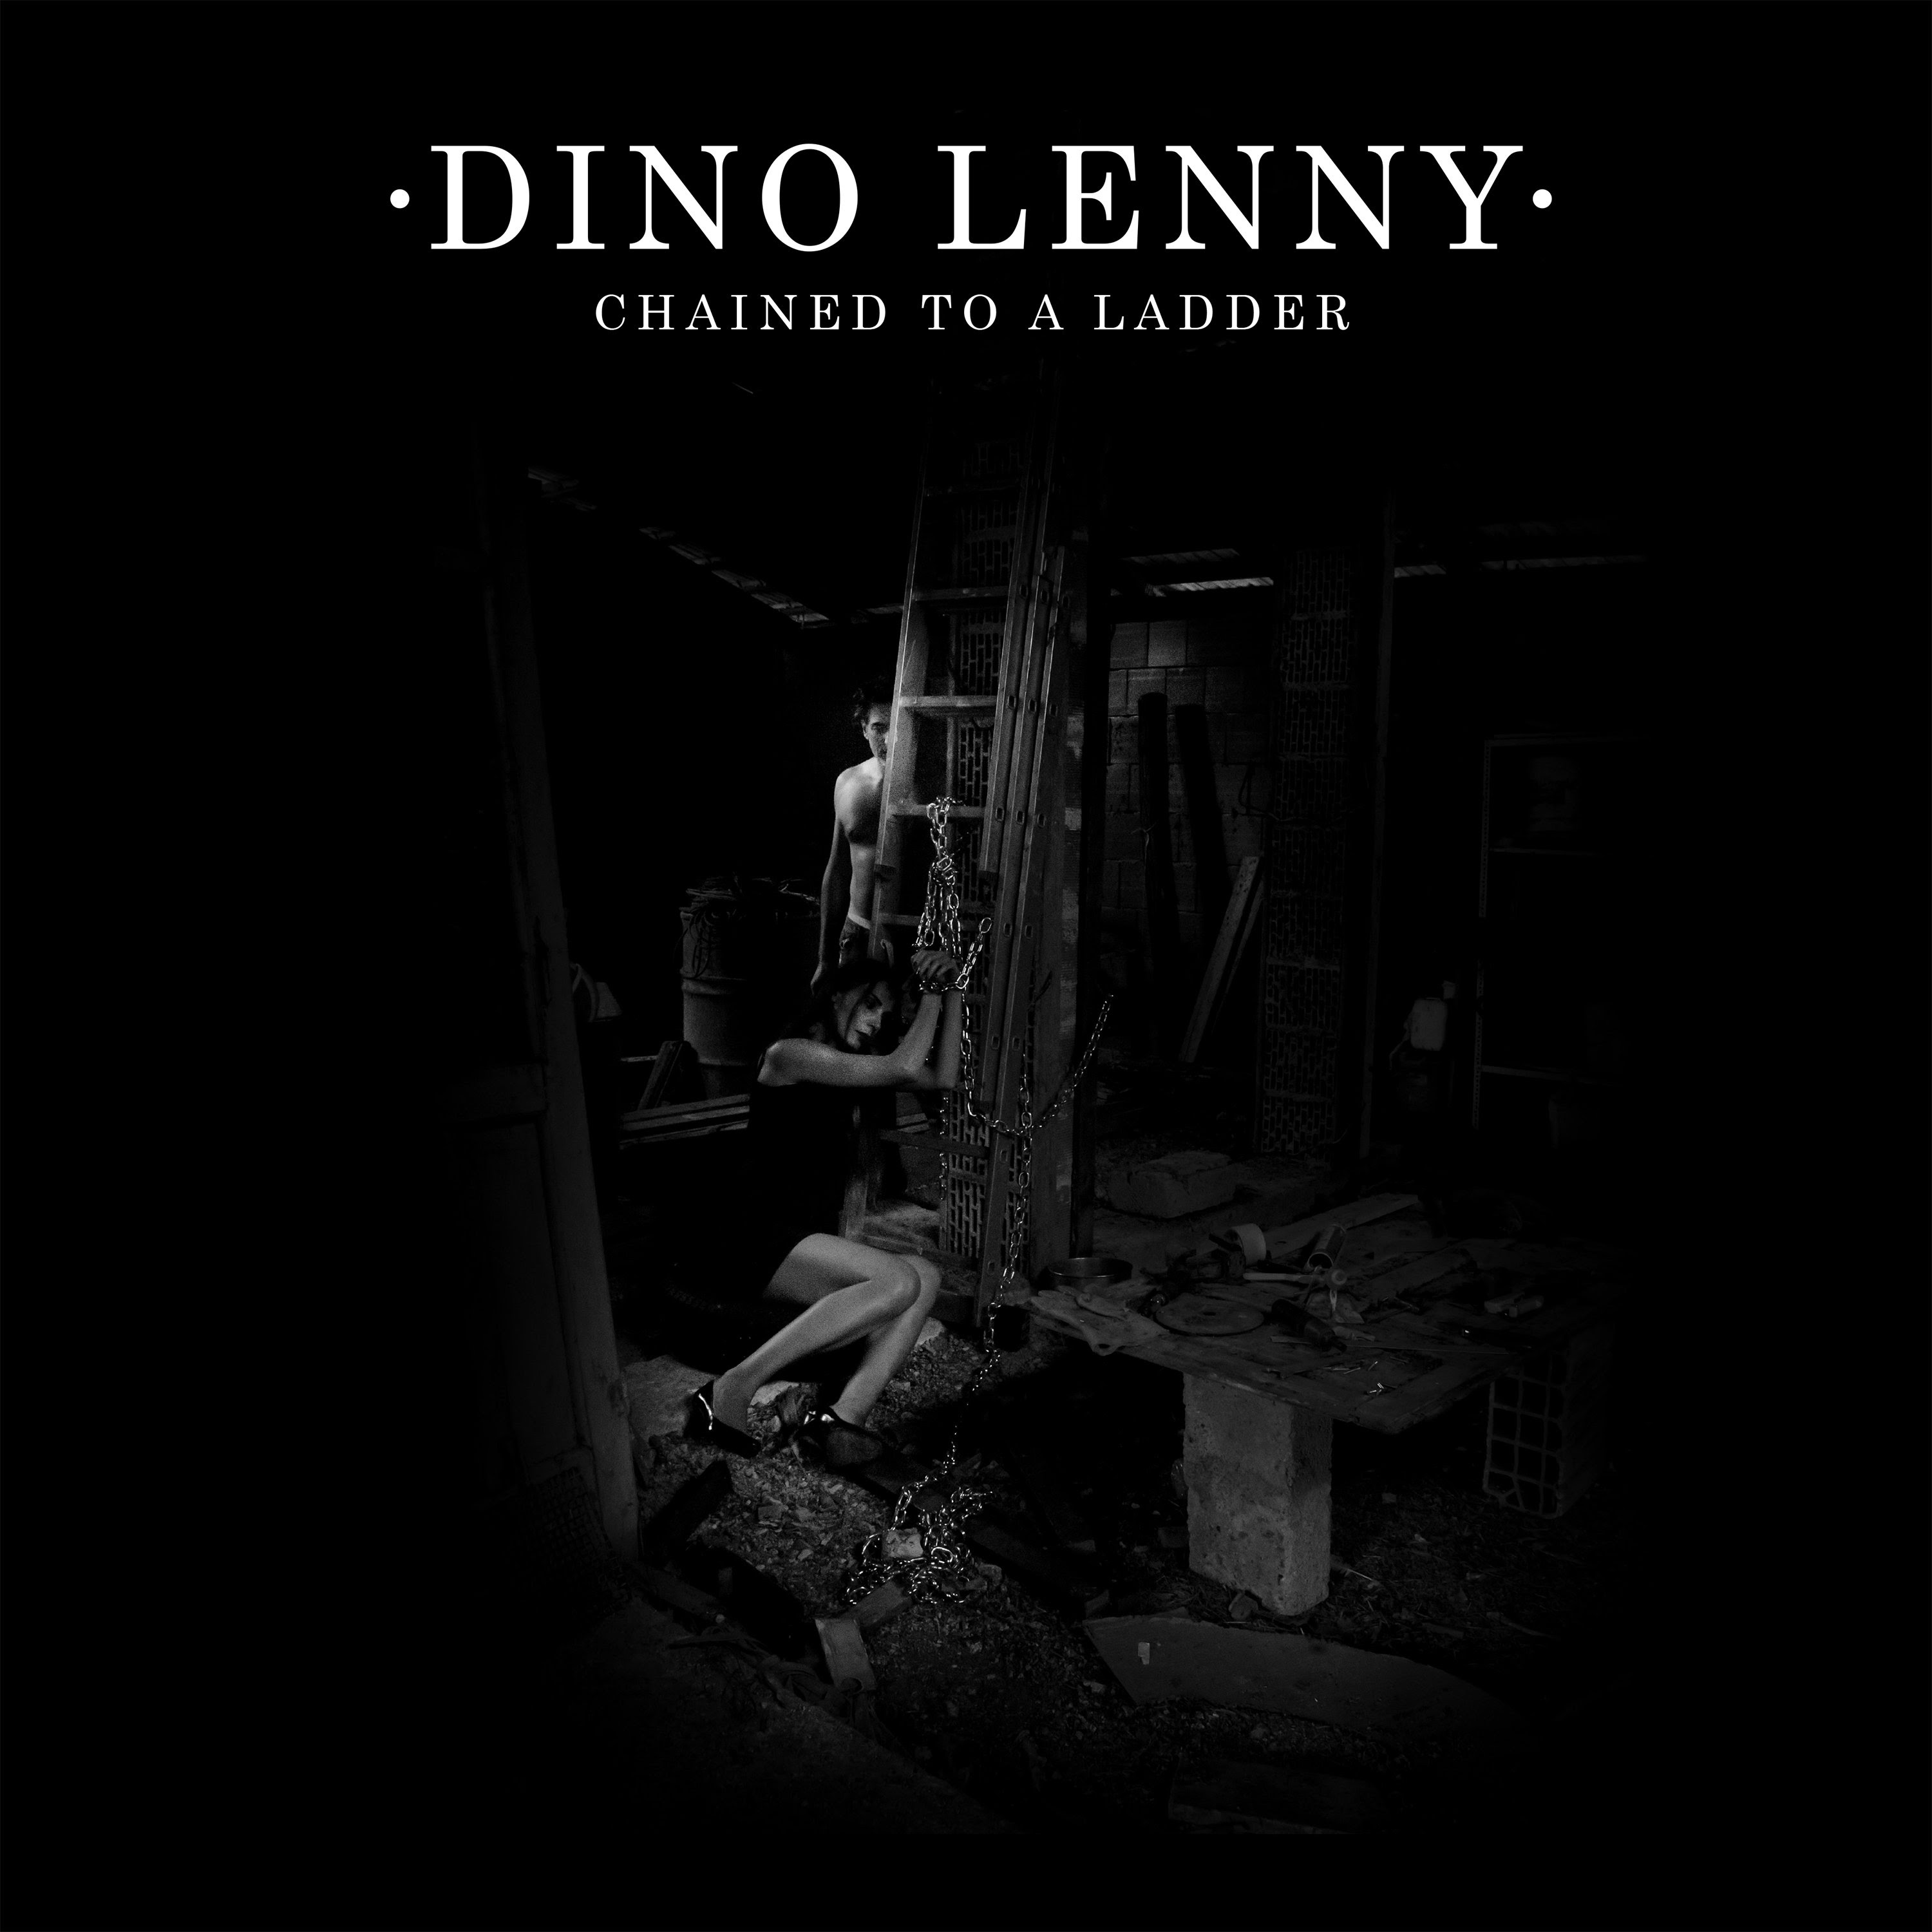 Dino Lenny/CHAINED TO A LADDER 12"